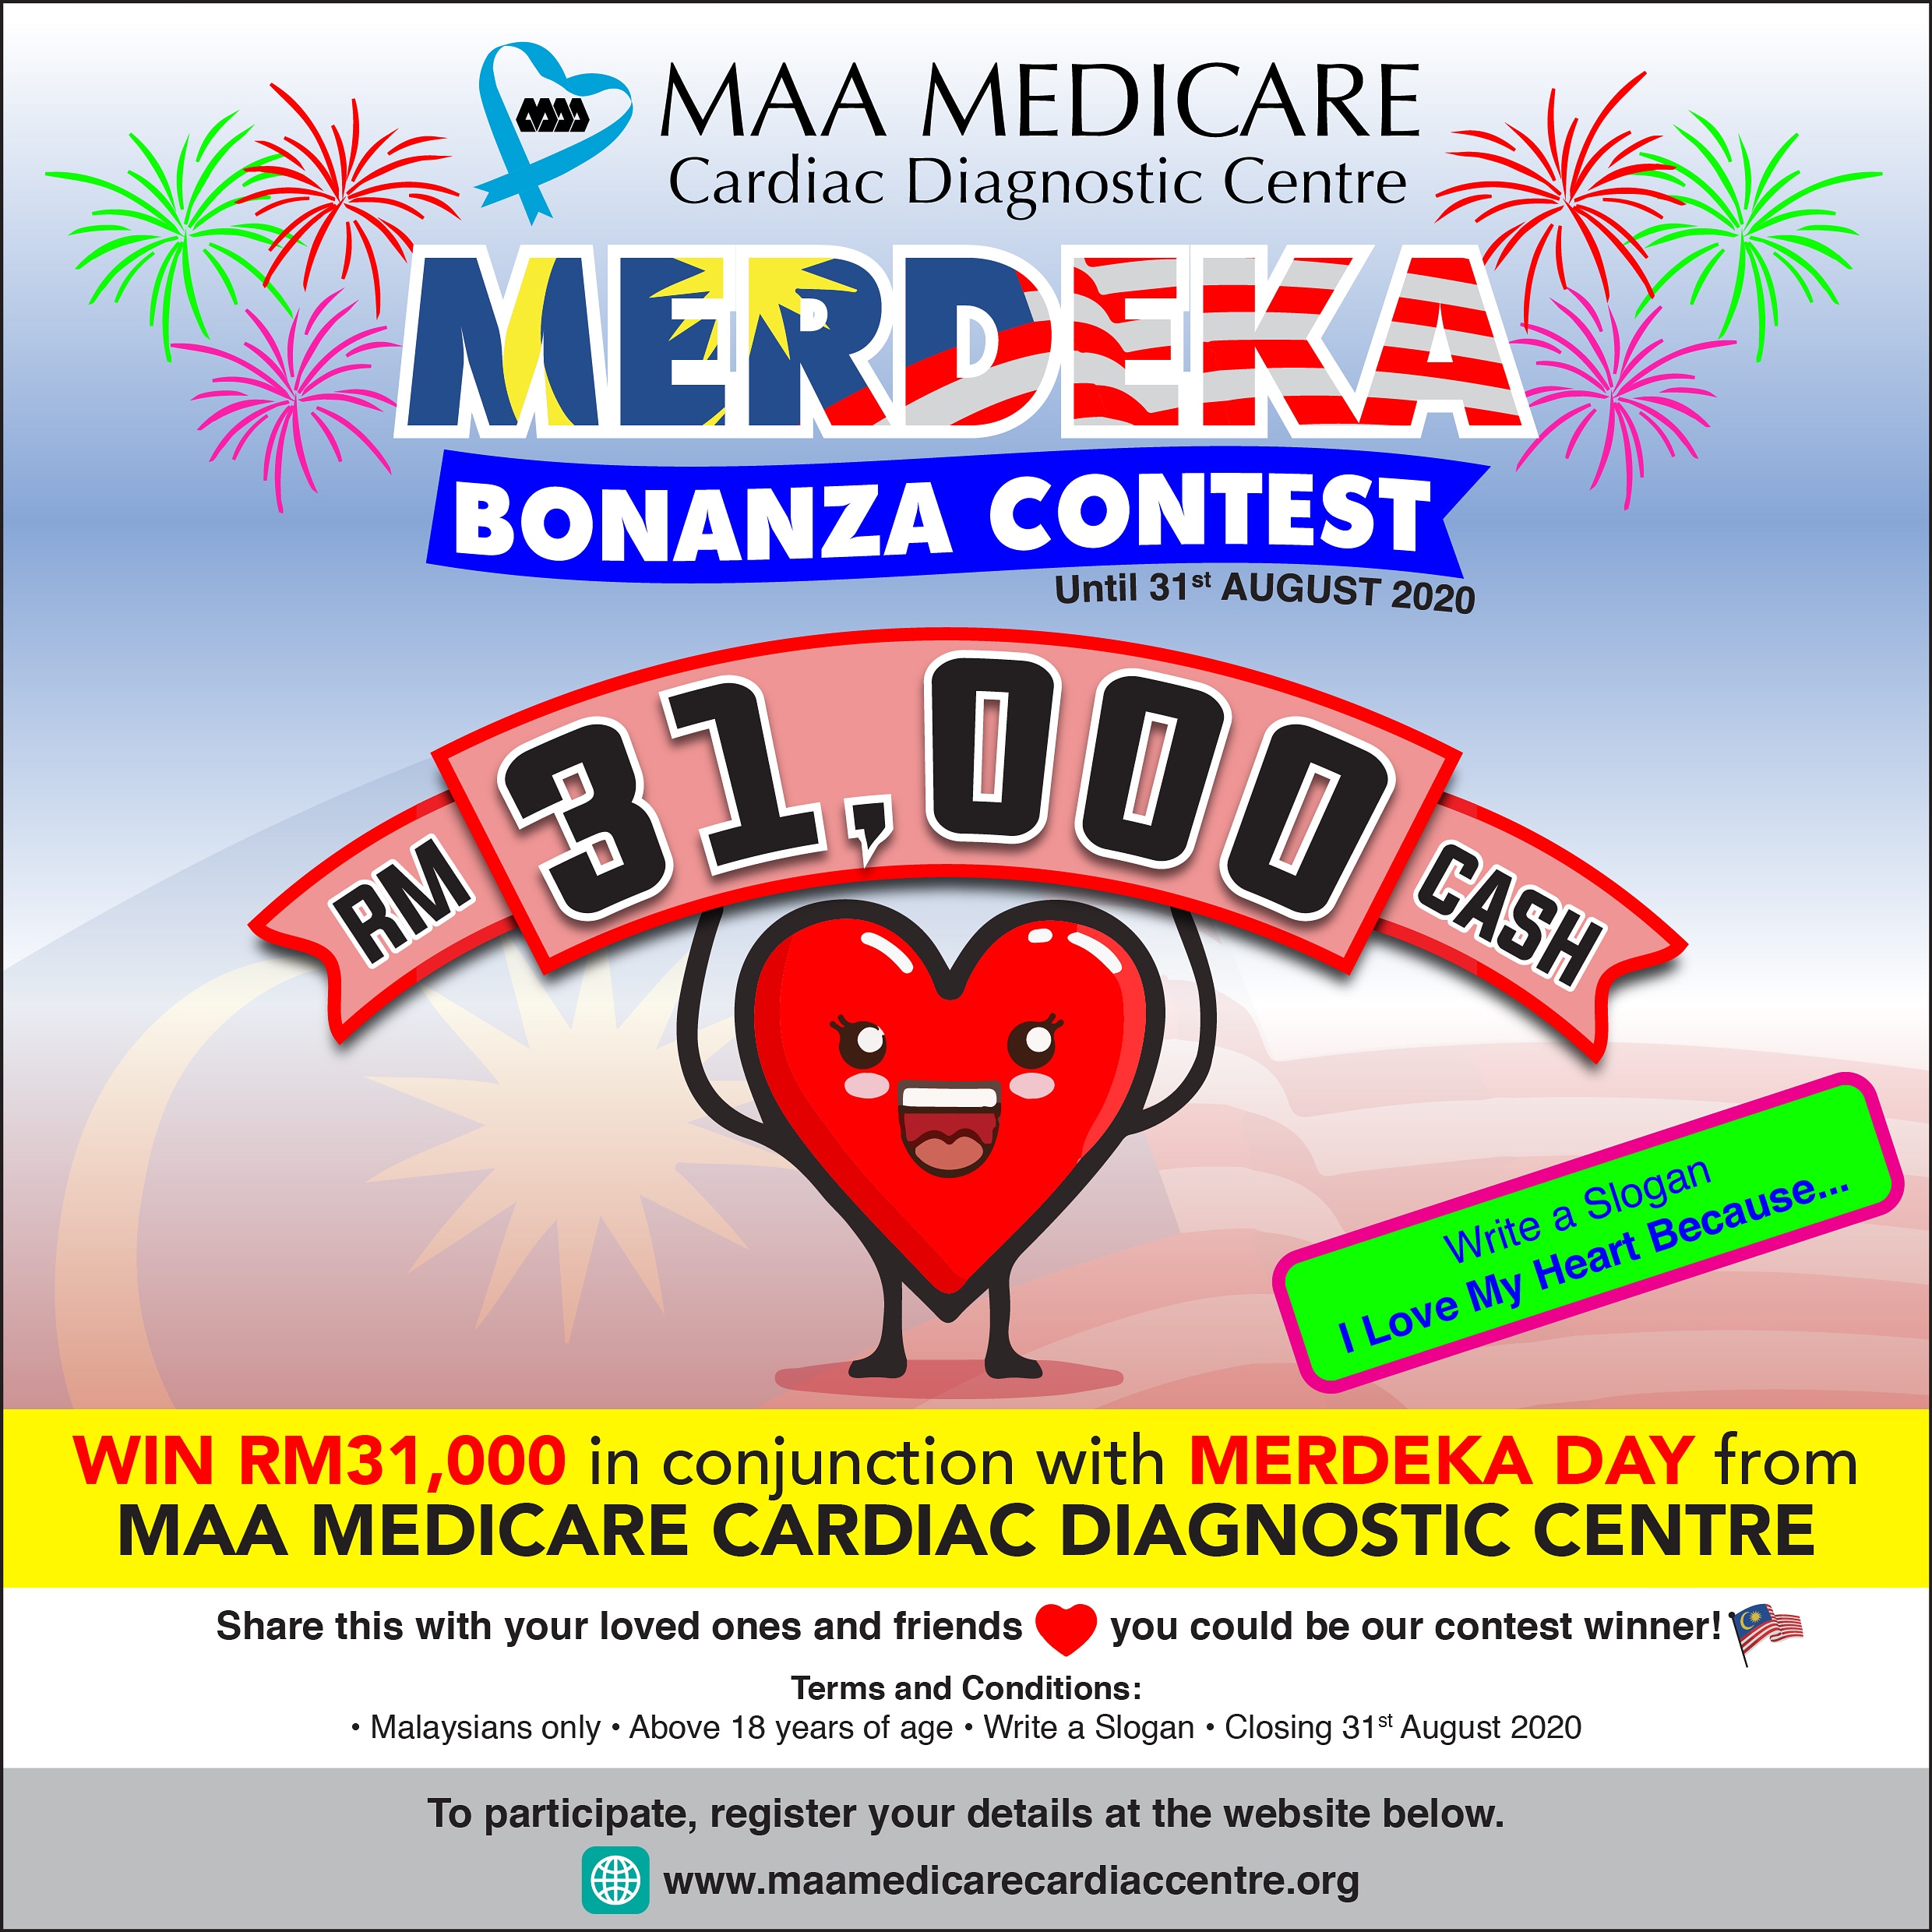 RM31,000 TO BE WON! Join the Merdeka Bonanza Contest today